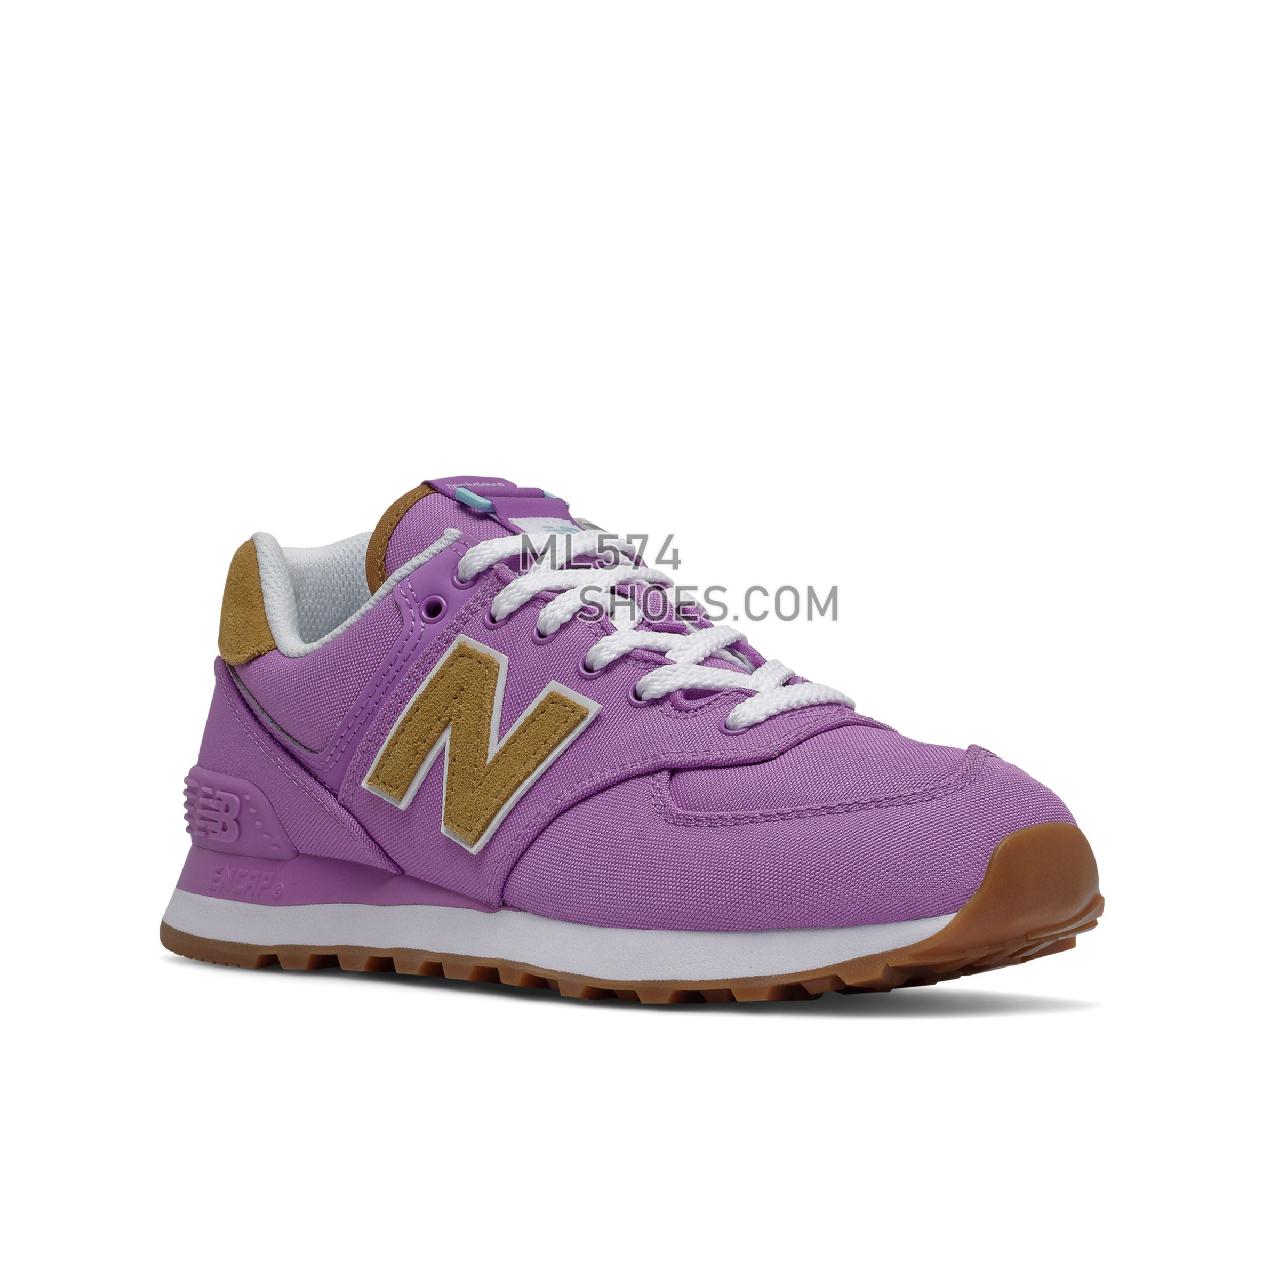 New Balance 574 - Women's Classic Sneakers - Purple with Workwear - WL574BC2